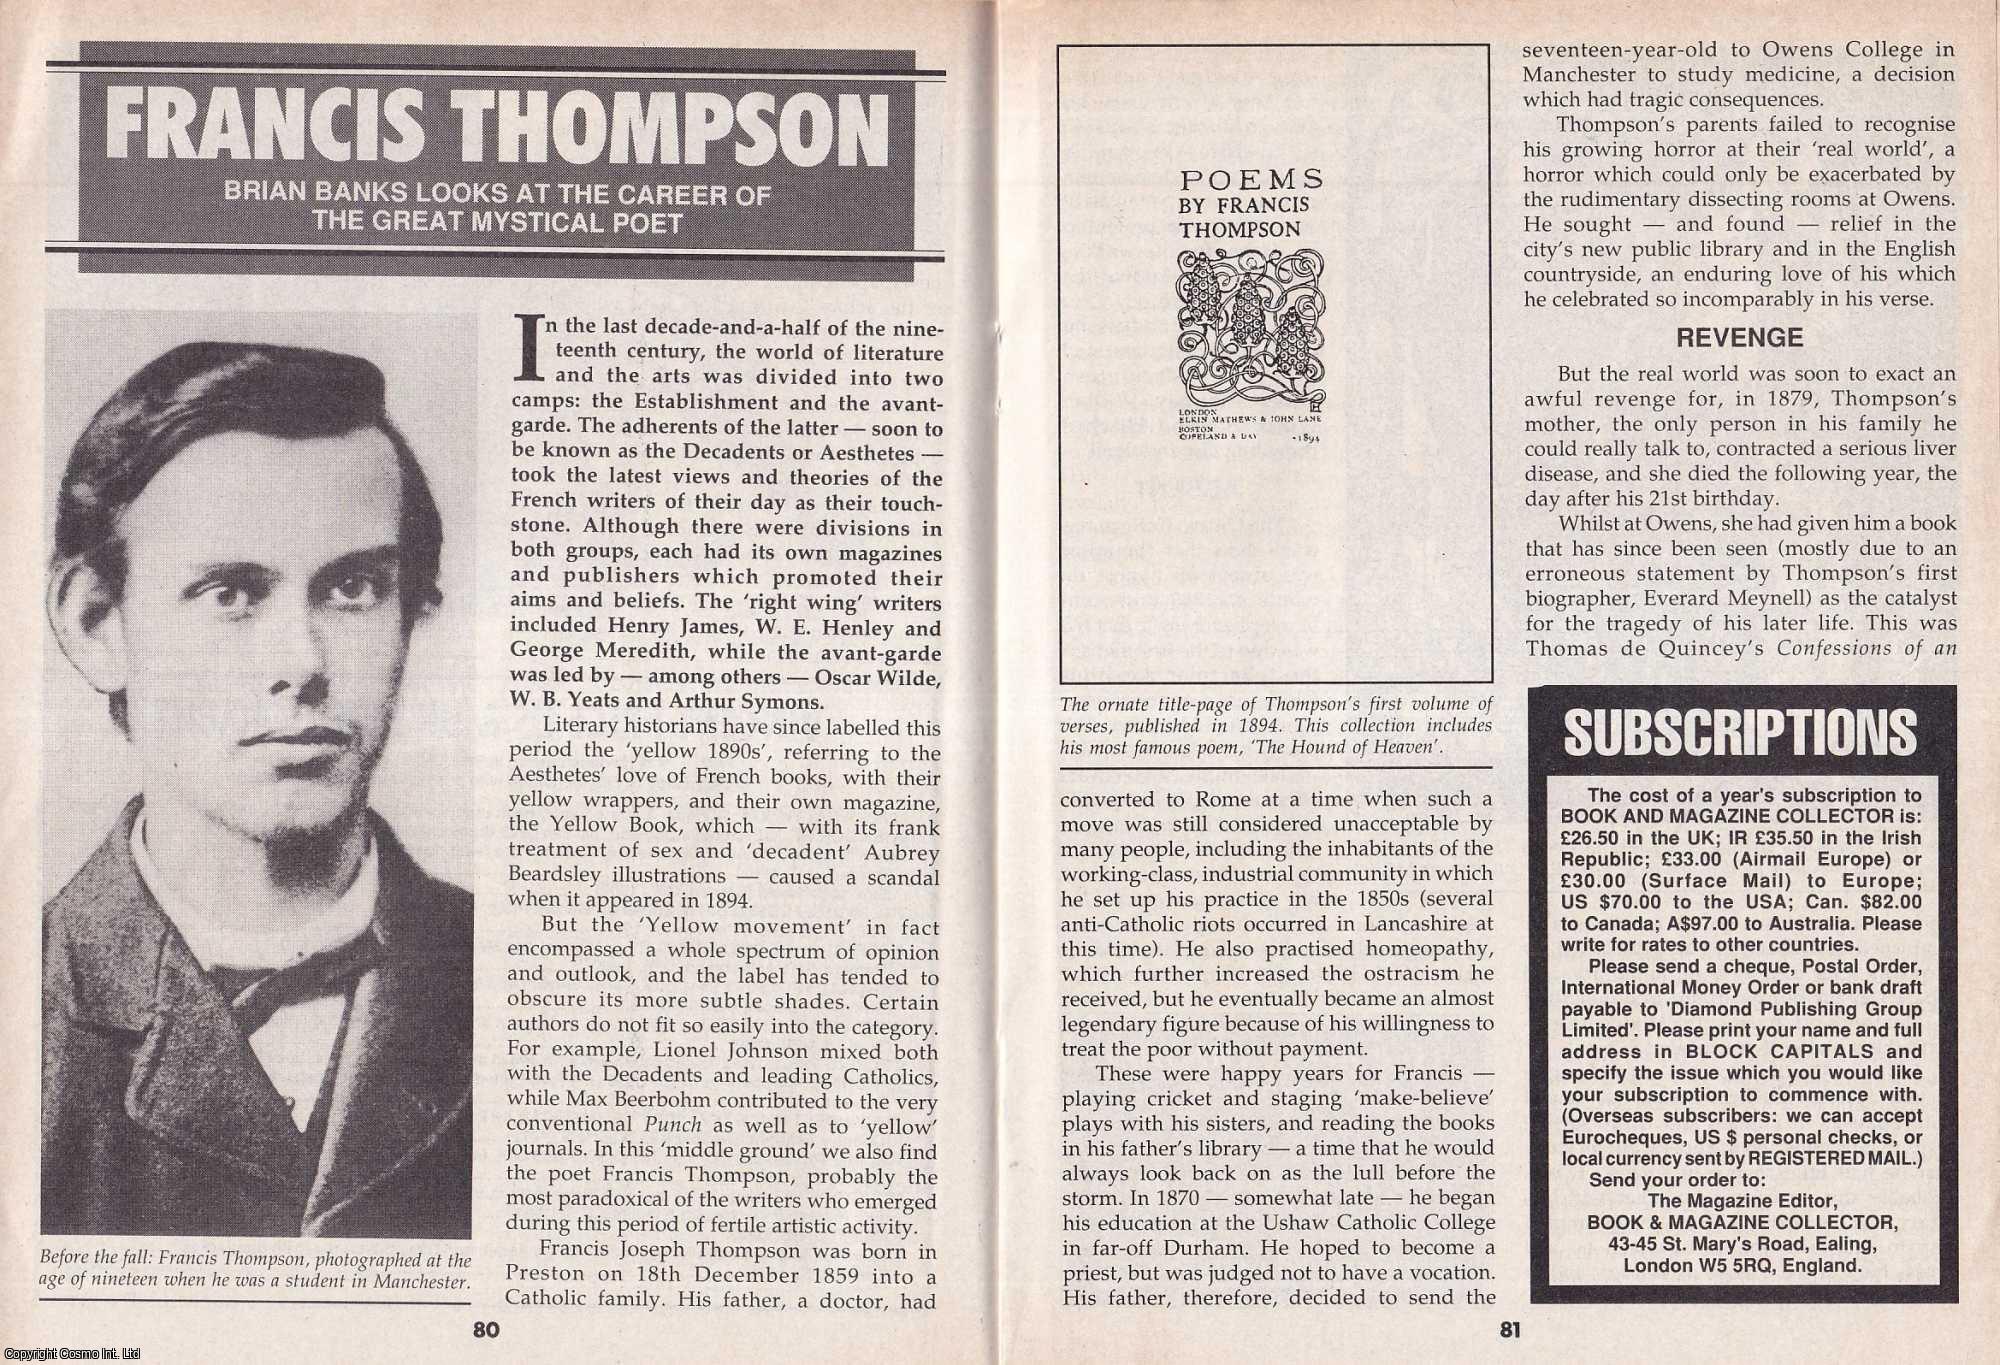 Brian Banks - Francis Thompson. Looking at The Career of The Great Mystical Poet. This is an original article separated from an issue of The Book & Magazine Collector publication.